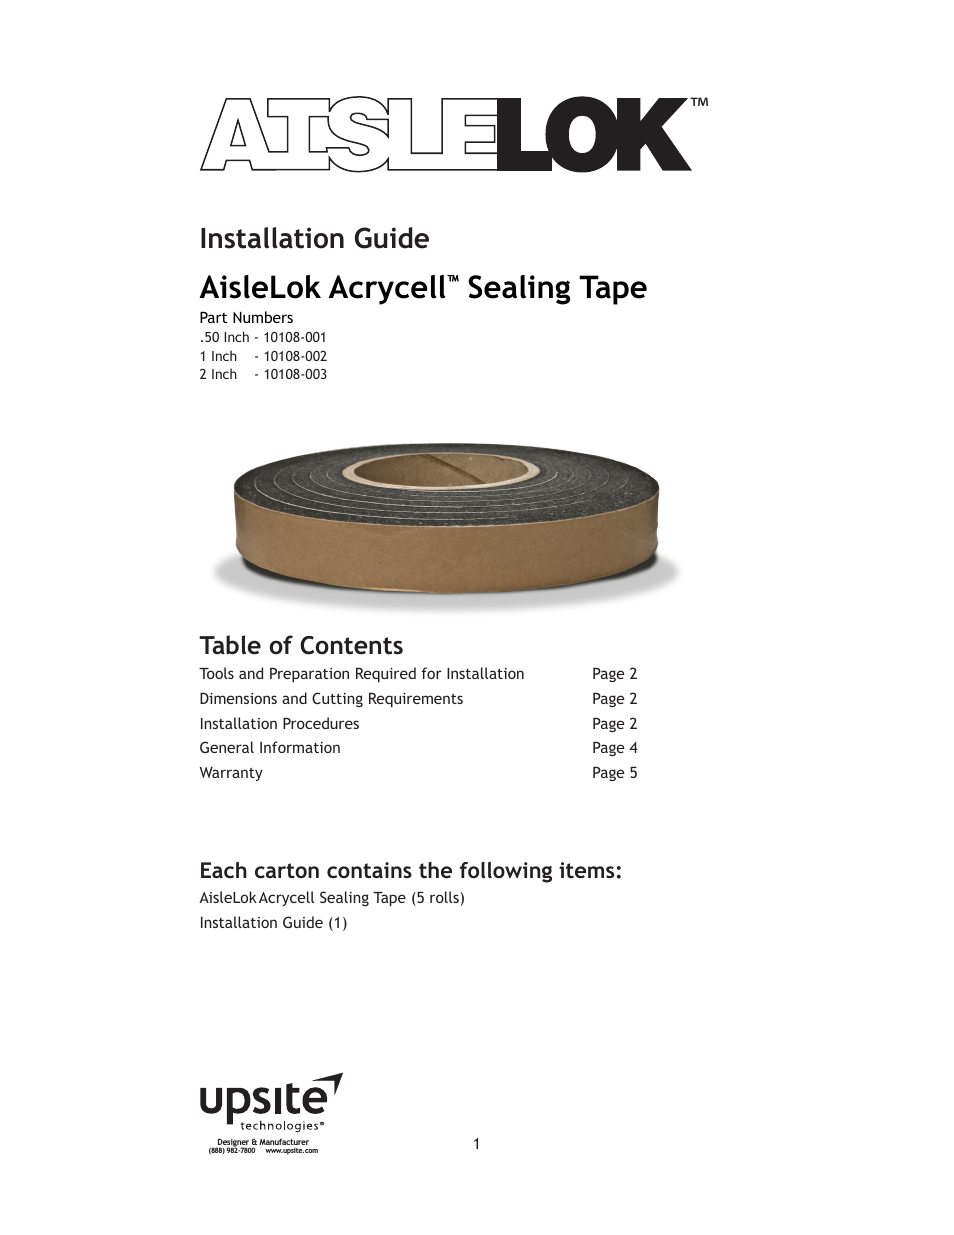 10108-001 Acrycell Sealing Tape